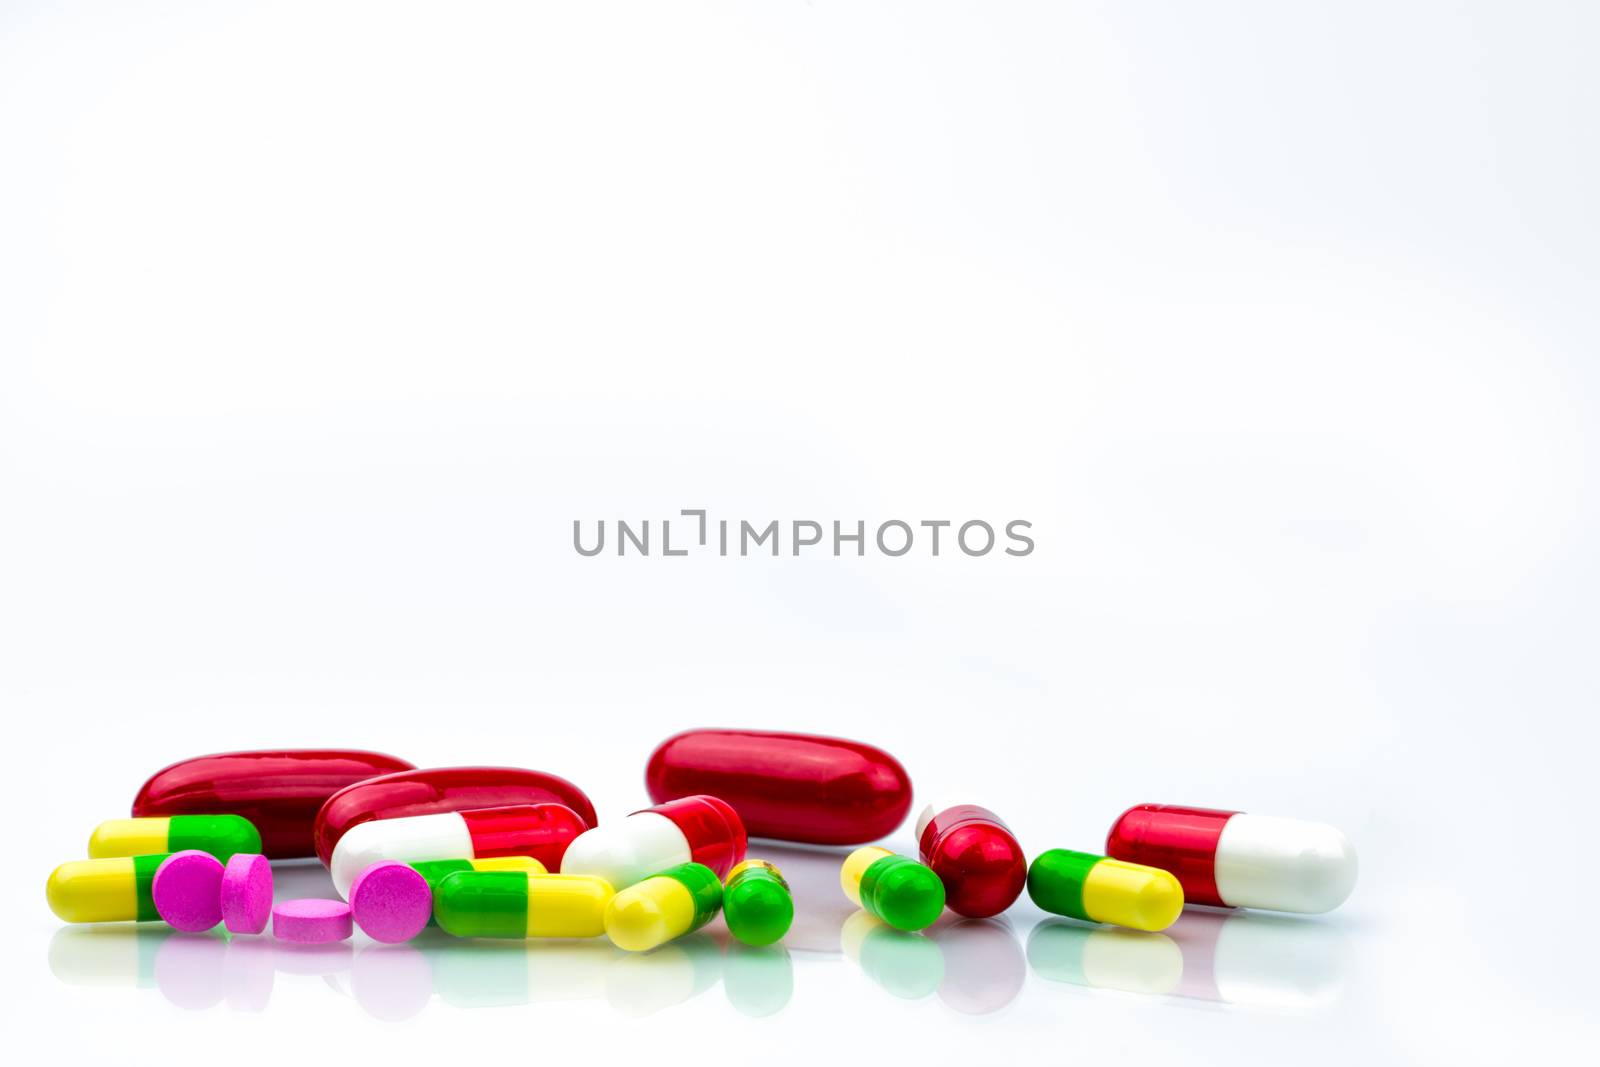 Colorful of capsule and pink tablets pills on white background with copy space for text. Global healthcare concept. Pharmaceutical industry. Pharmacy background. Pharmacology and drug interactions. Drug allergy. by Fahroni